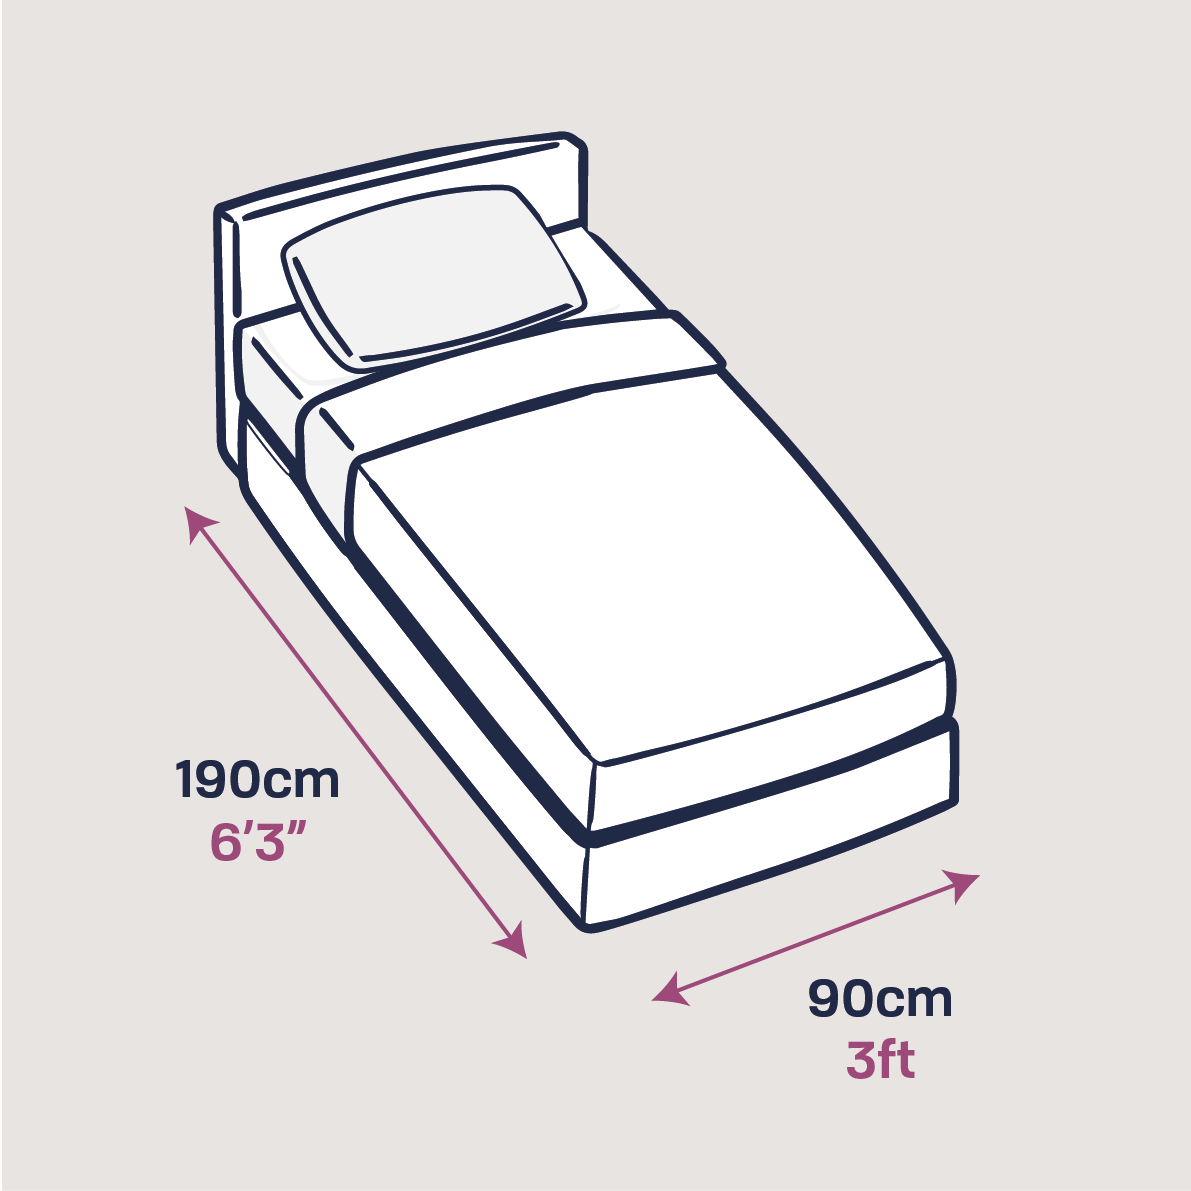 Single size bed